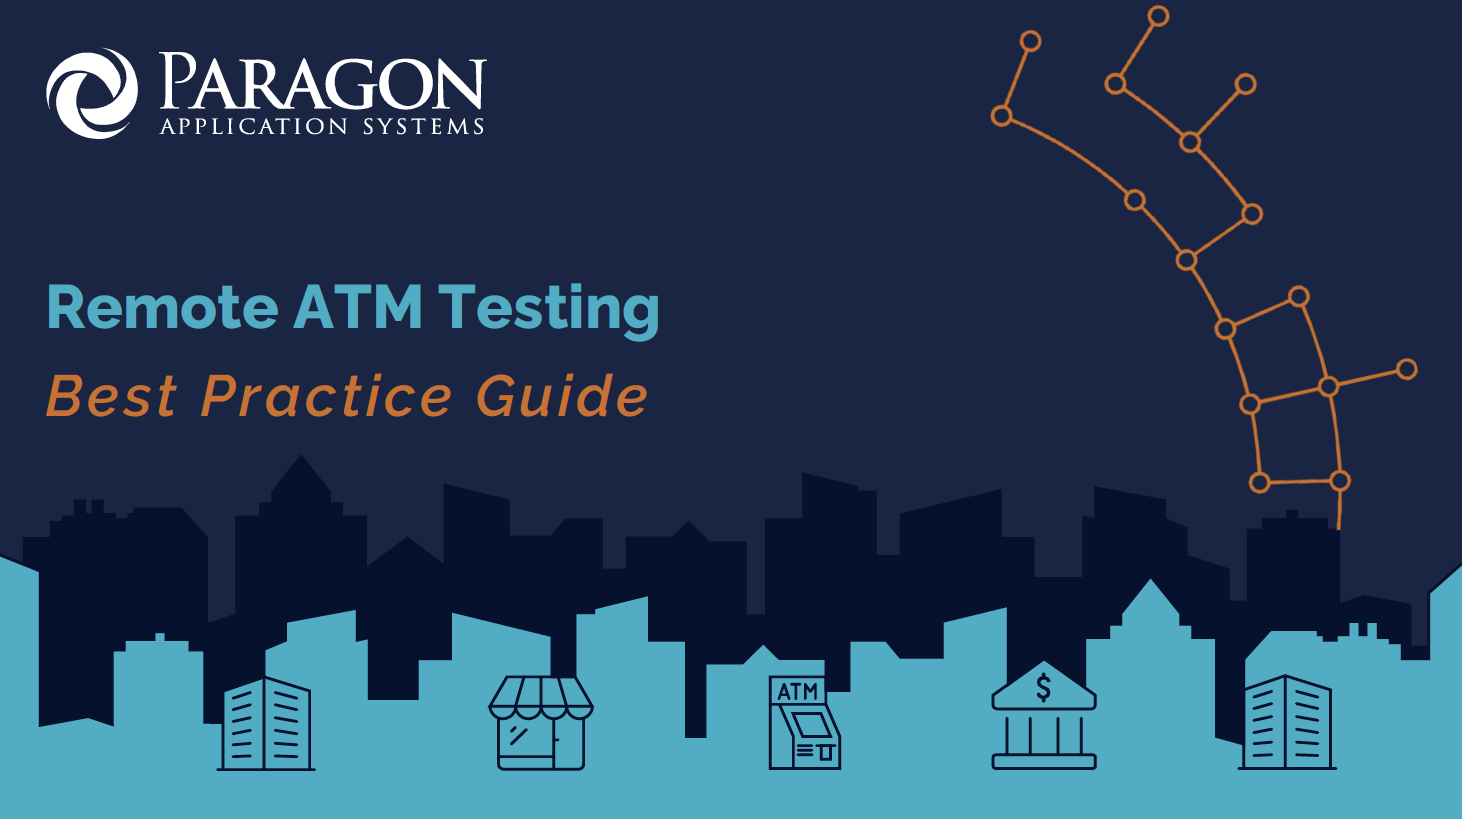 ATM Testing in the Cloud - Best Practices